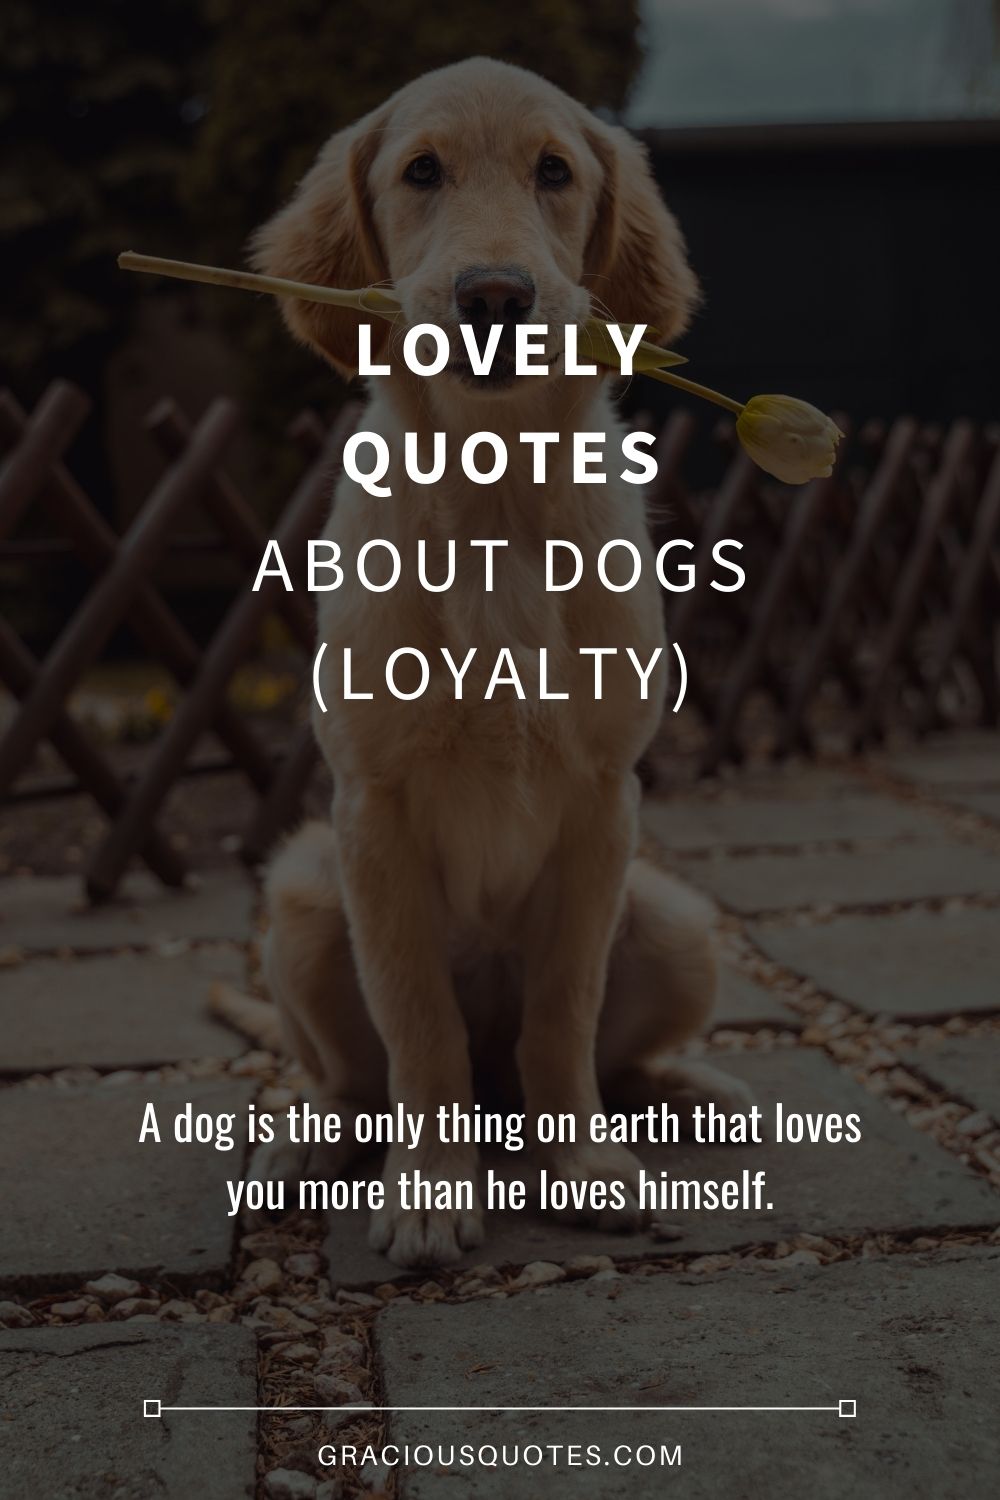 Lovely Quotes About Dogs (LOYALTY) - Gracious Quotes